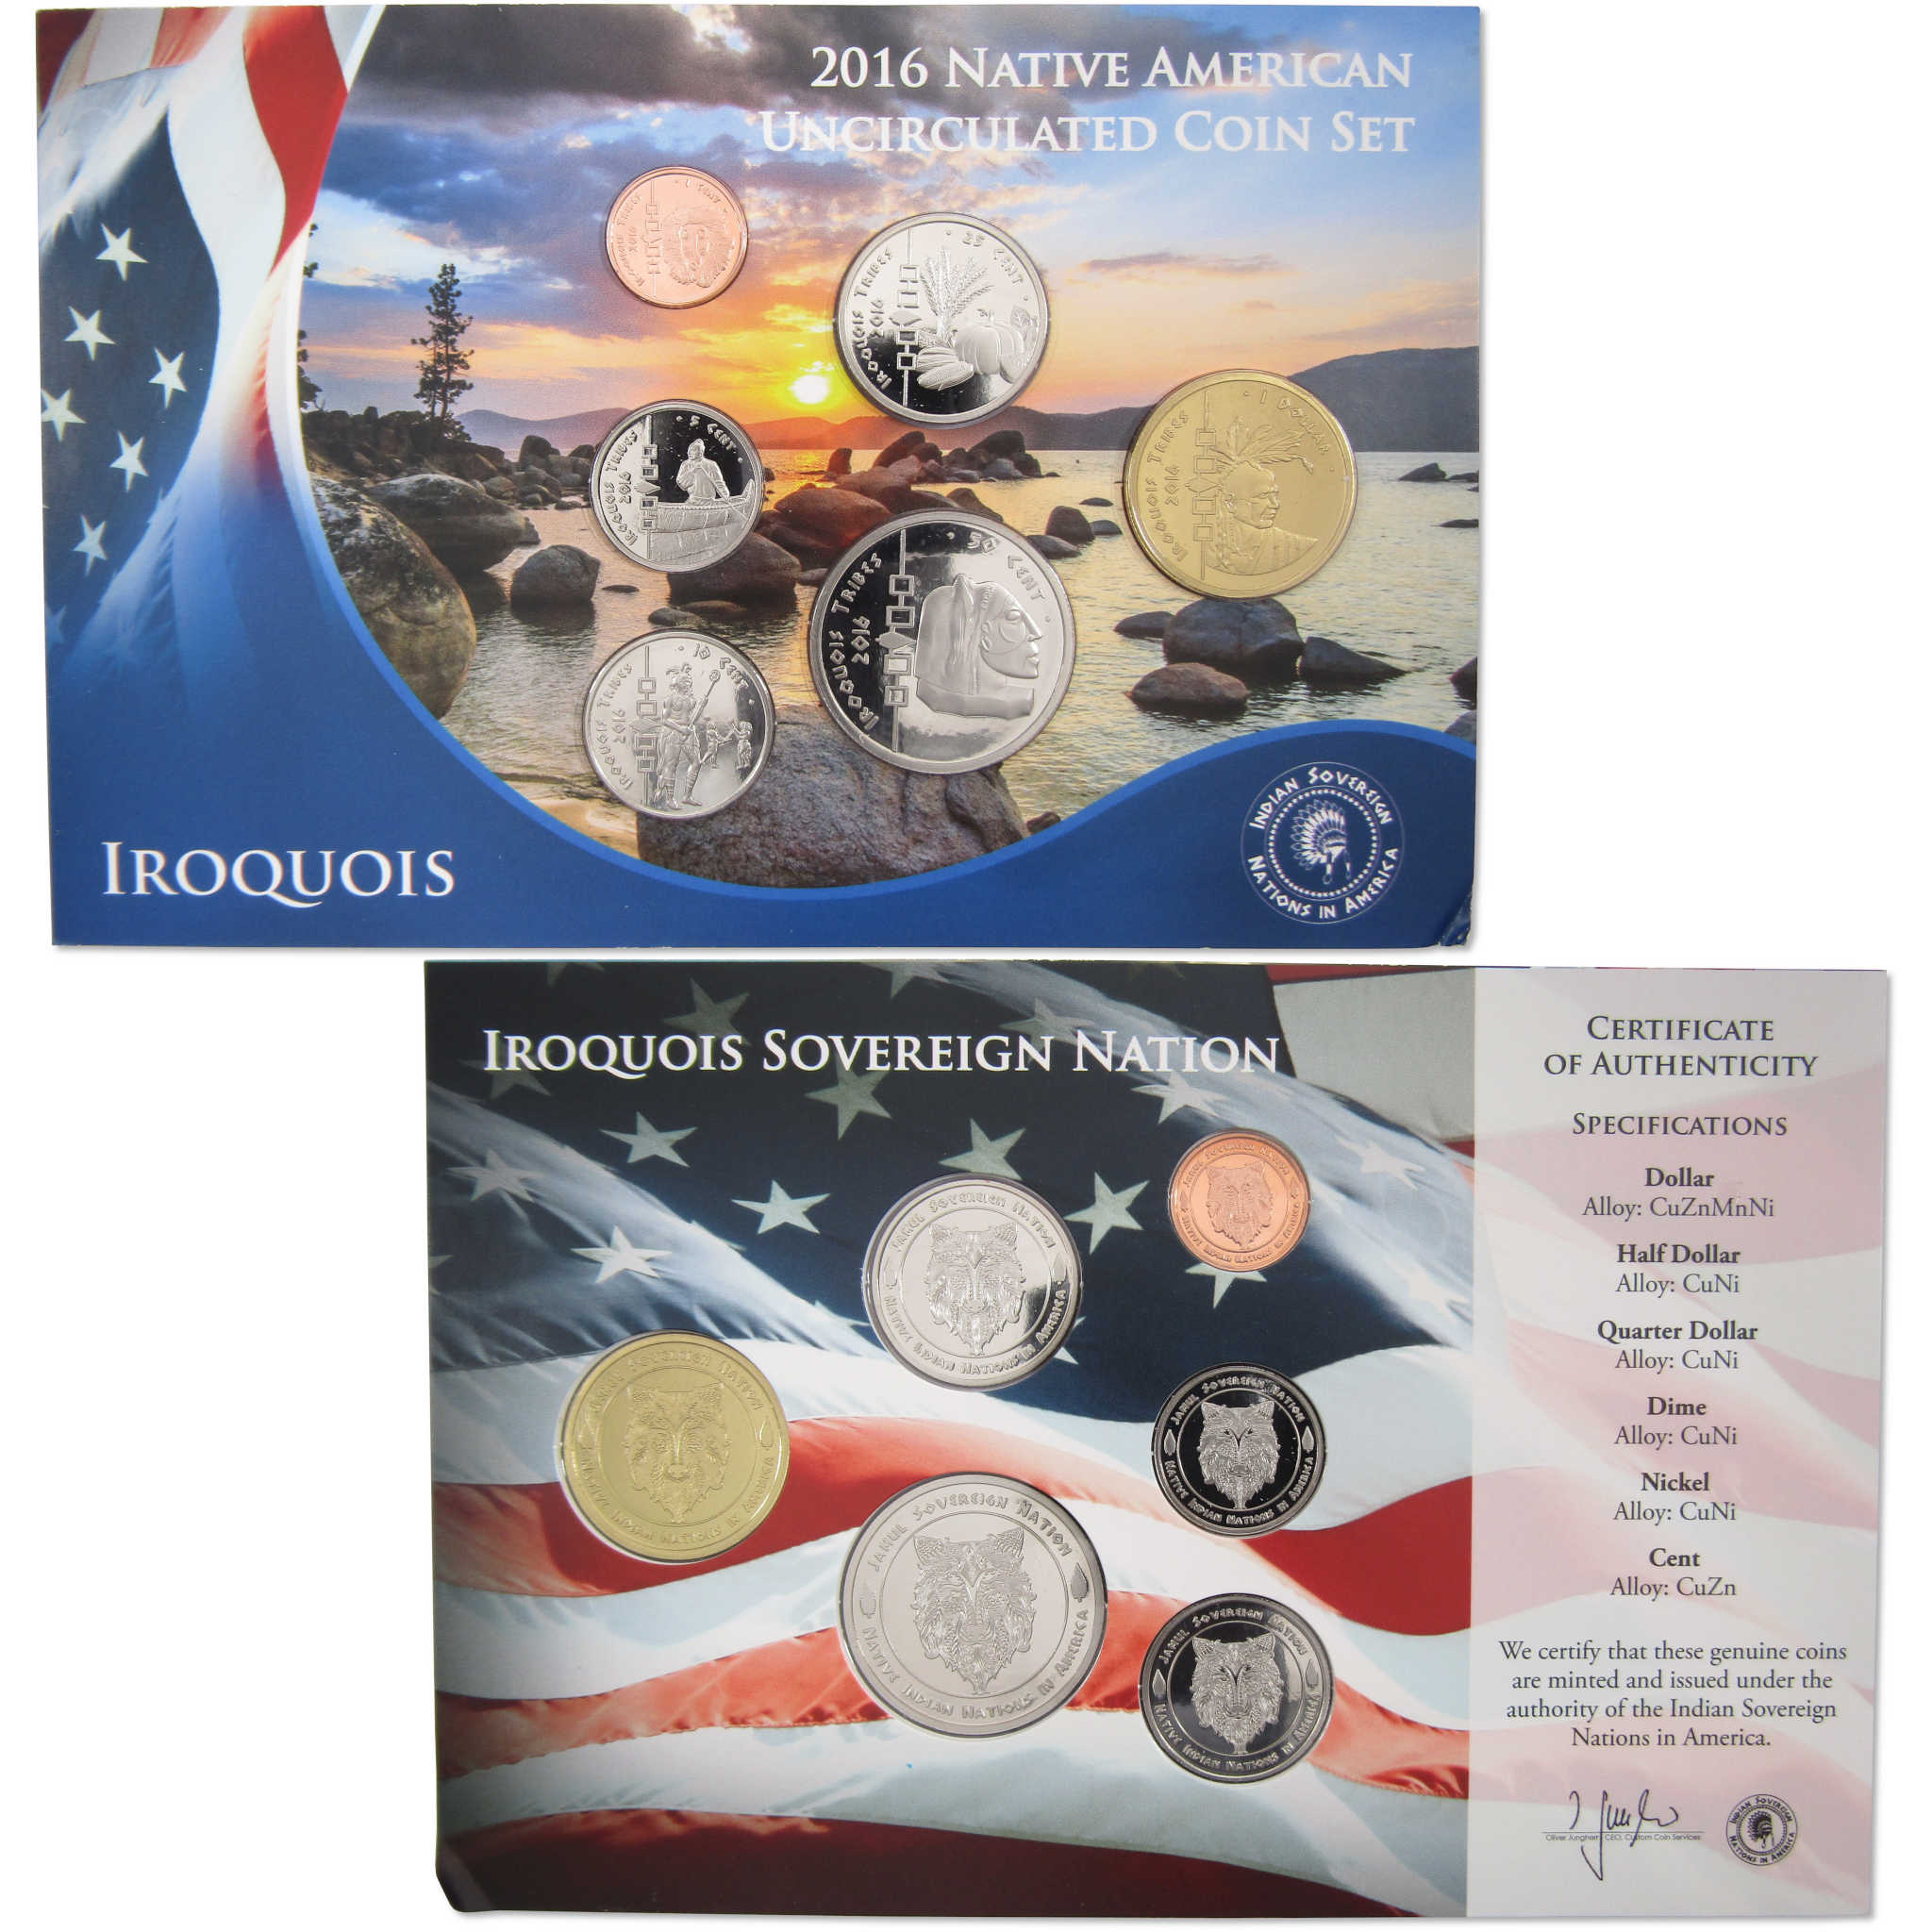 2016 Jamul Native American Iroquois Sovereign Nation Uncirculated Coin Set